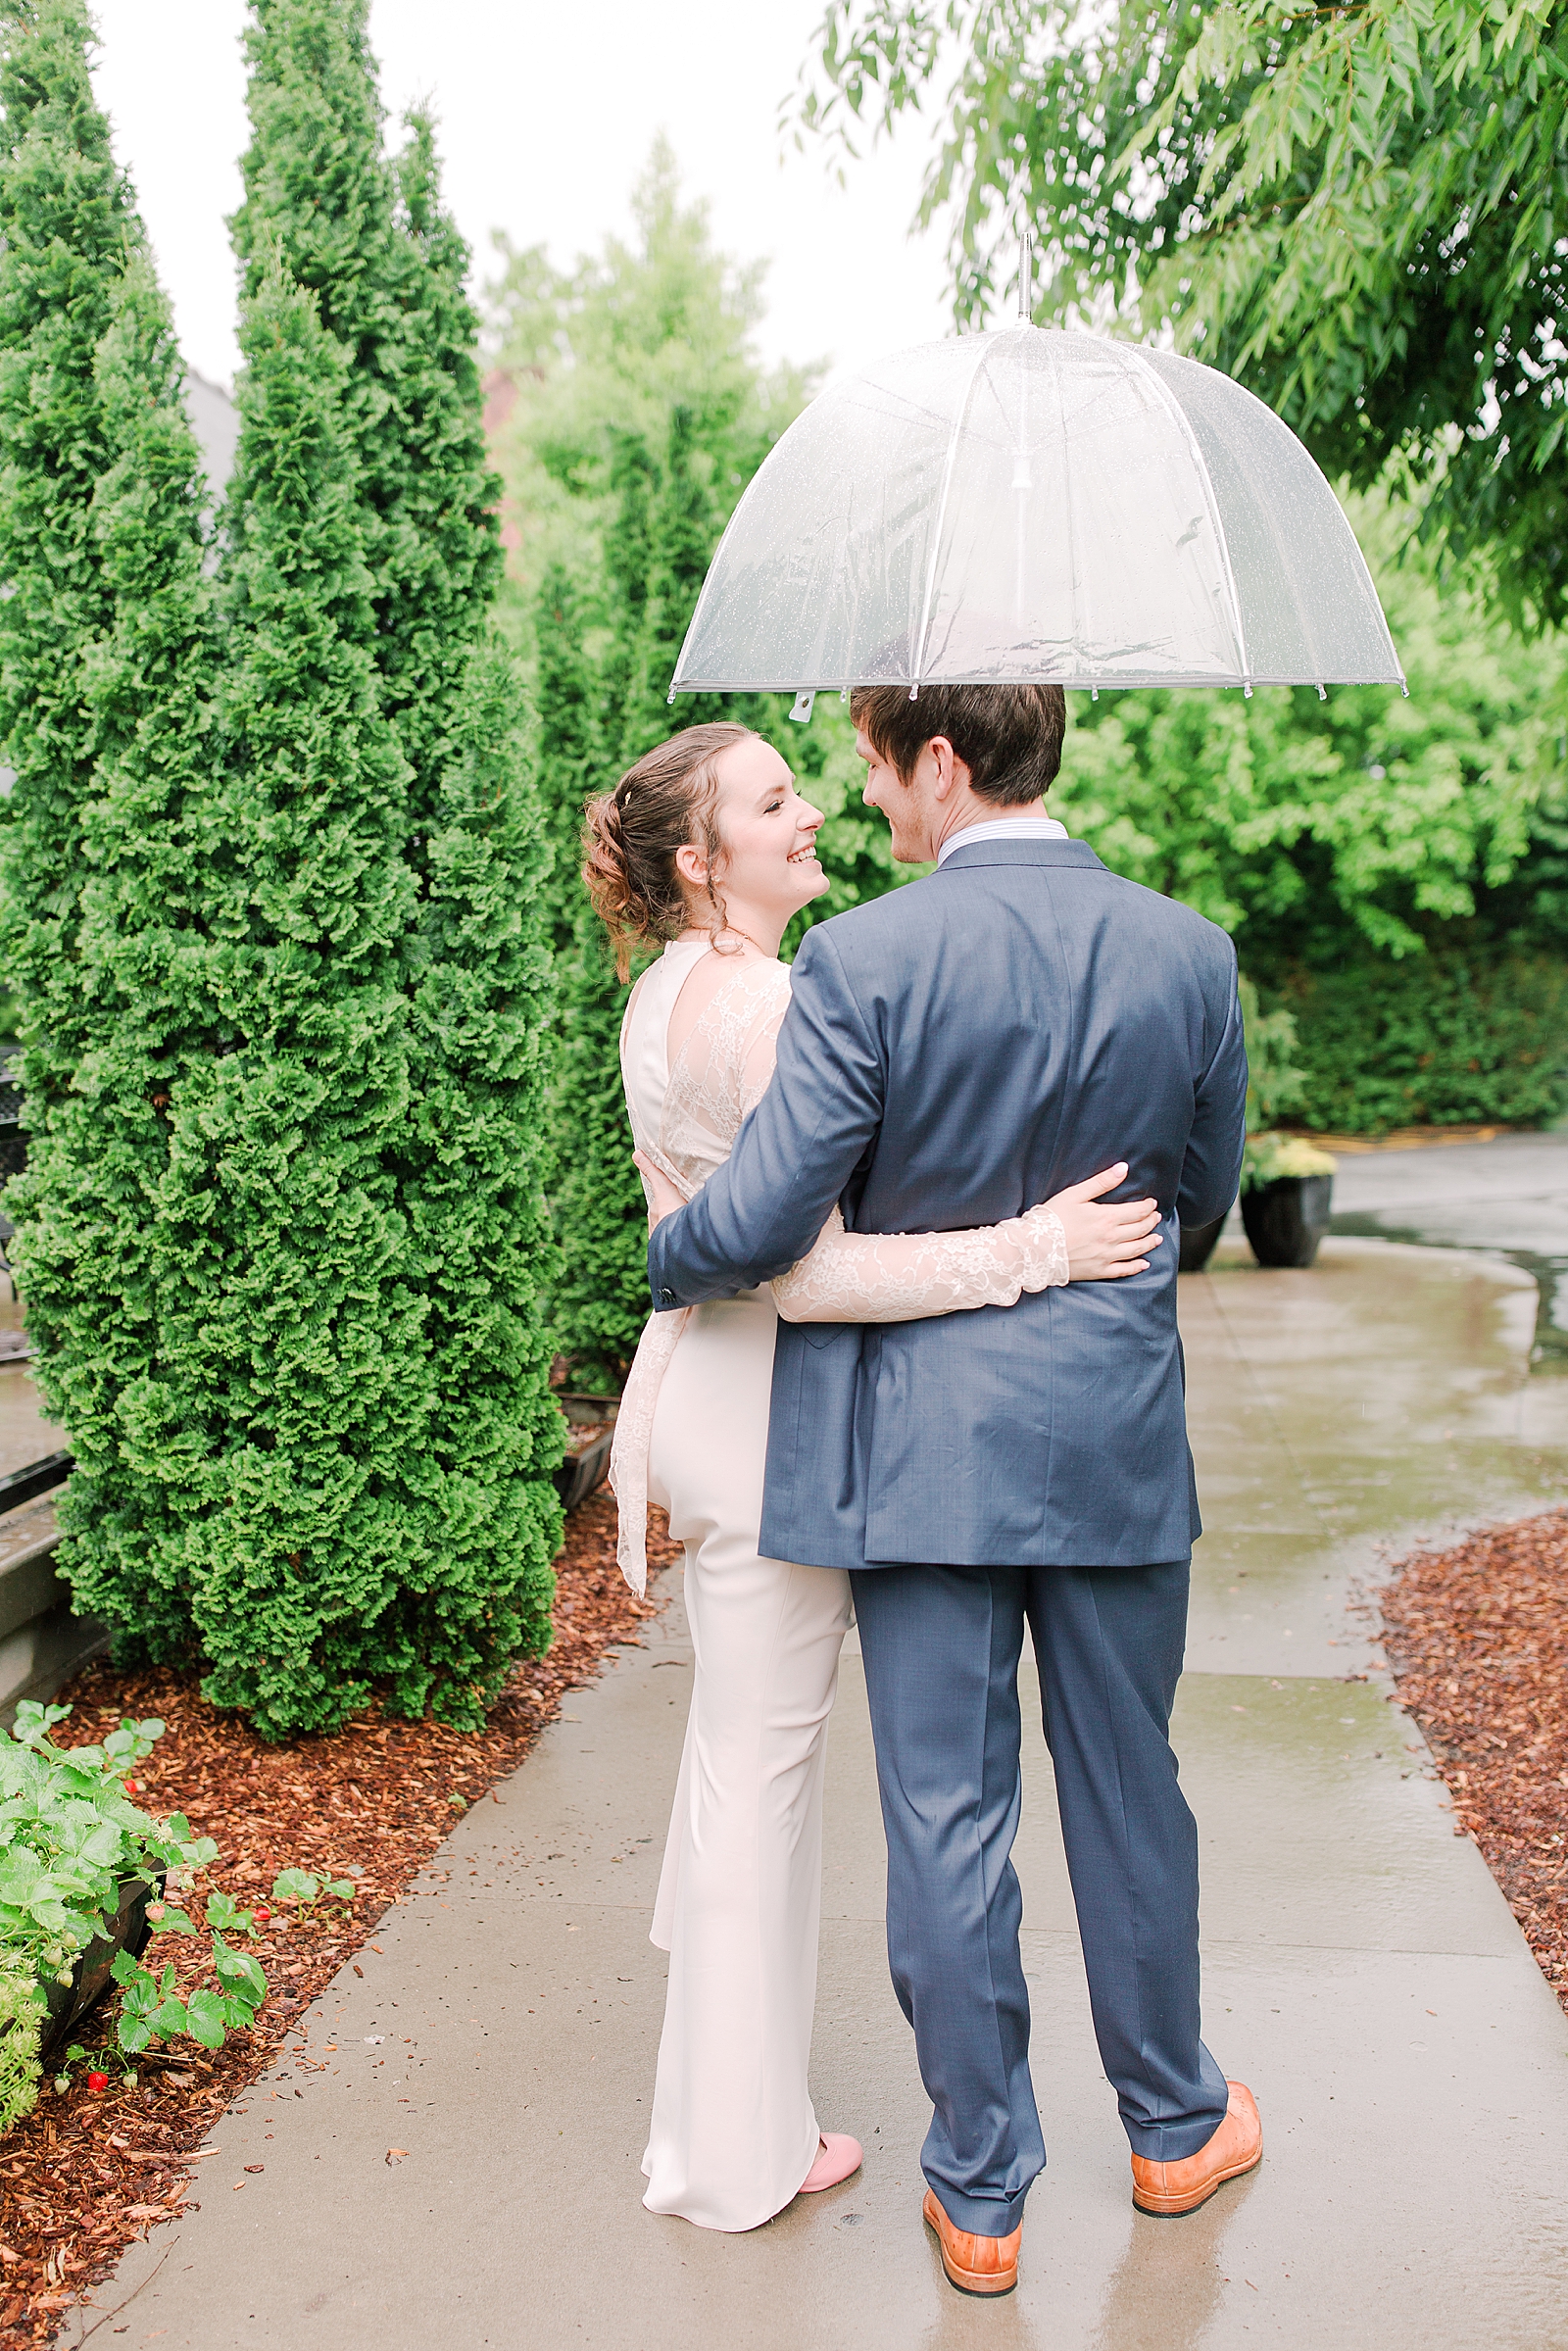 Asheville Wedding Bride and Groom Smiling at each other under umbrella Photo